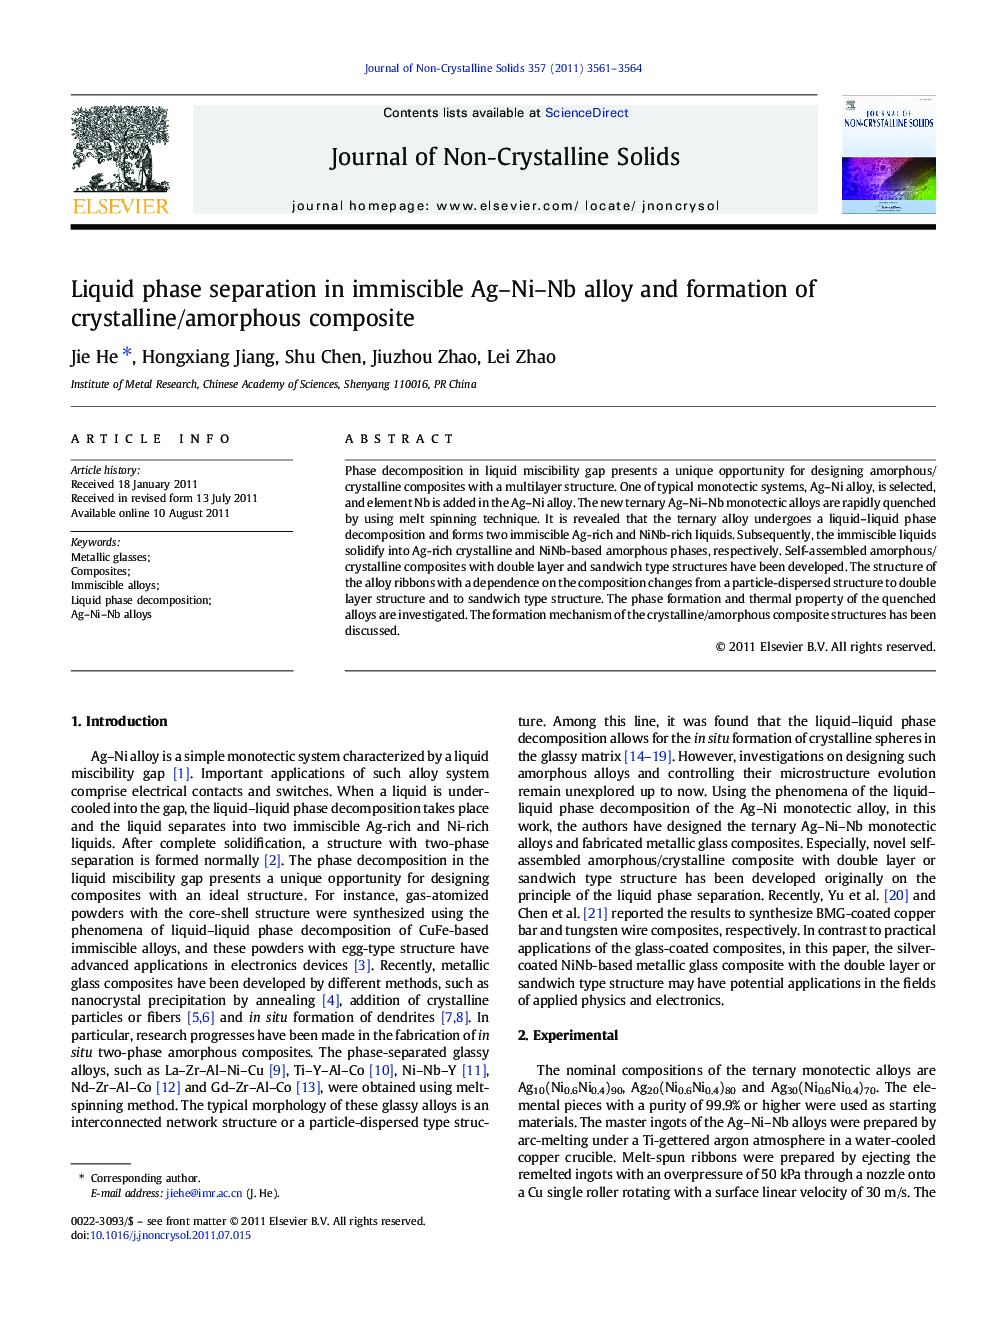 Liquid phase separation in immiscible Ag–Ni–Nb alloy and formation of crystalline/amorphous composite